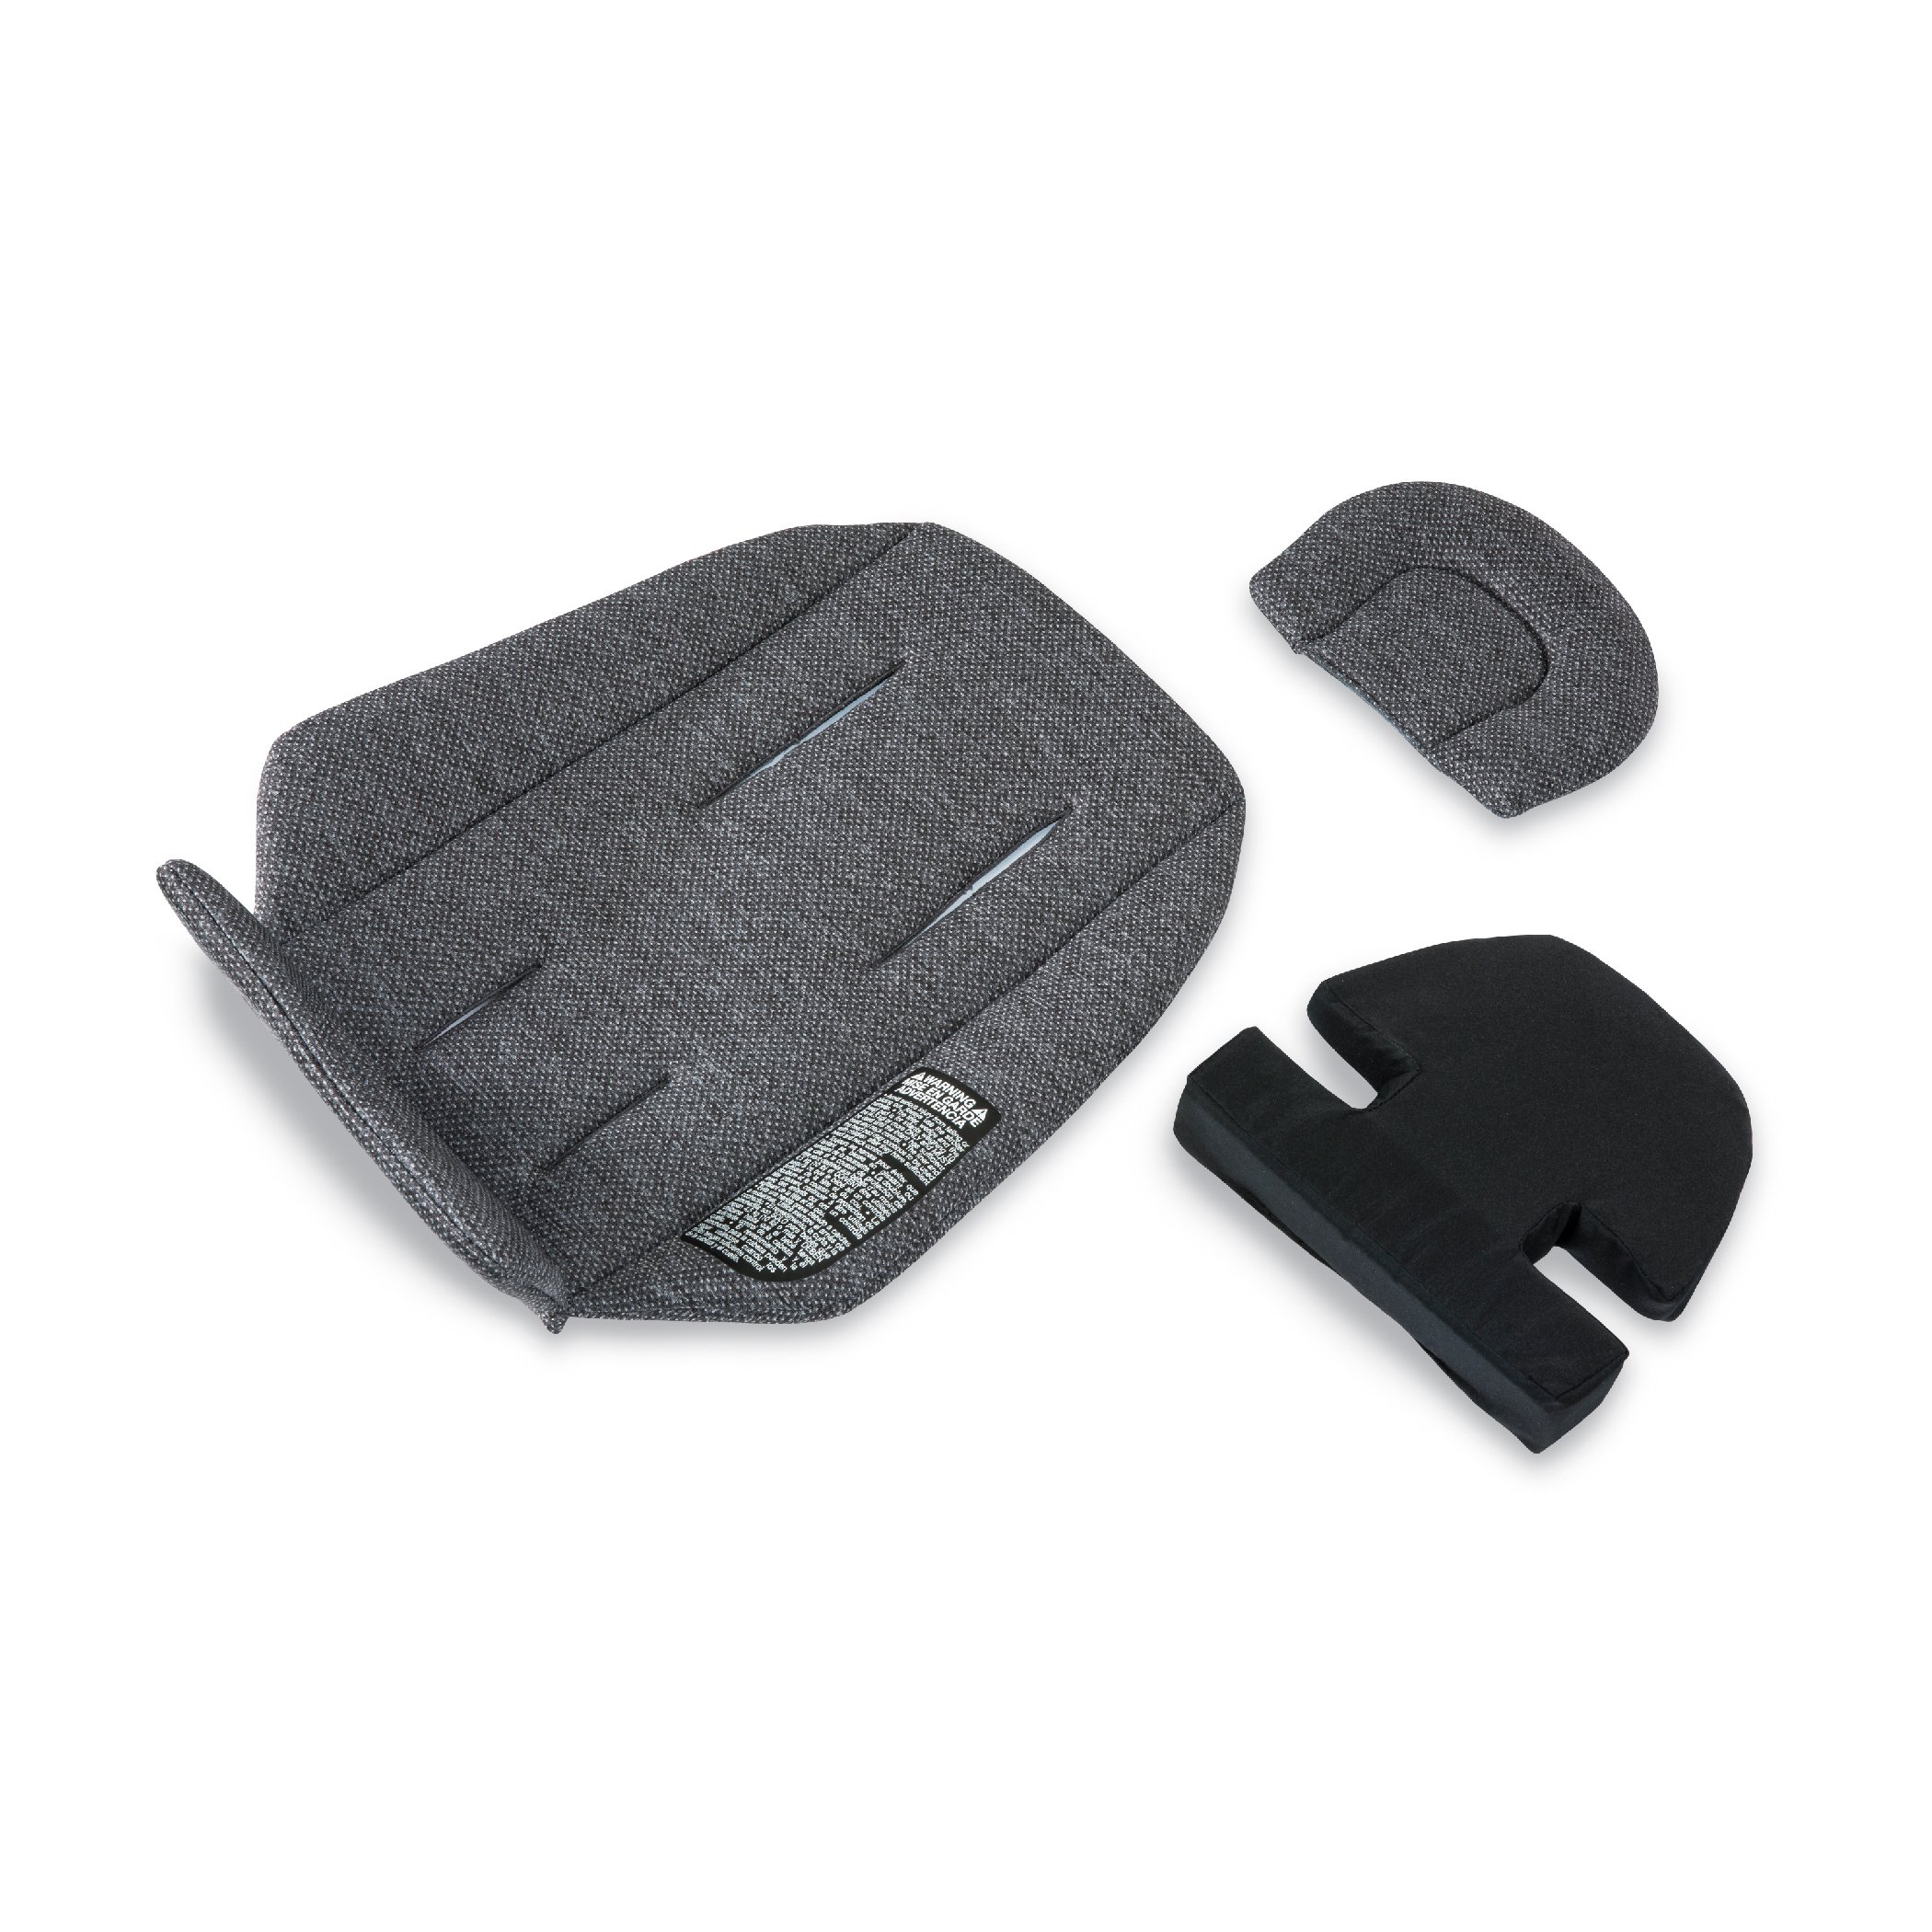 Stroller pad, adjustable headrest pillow, and support wedge